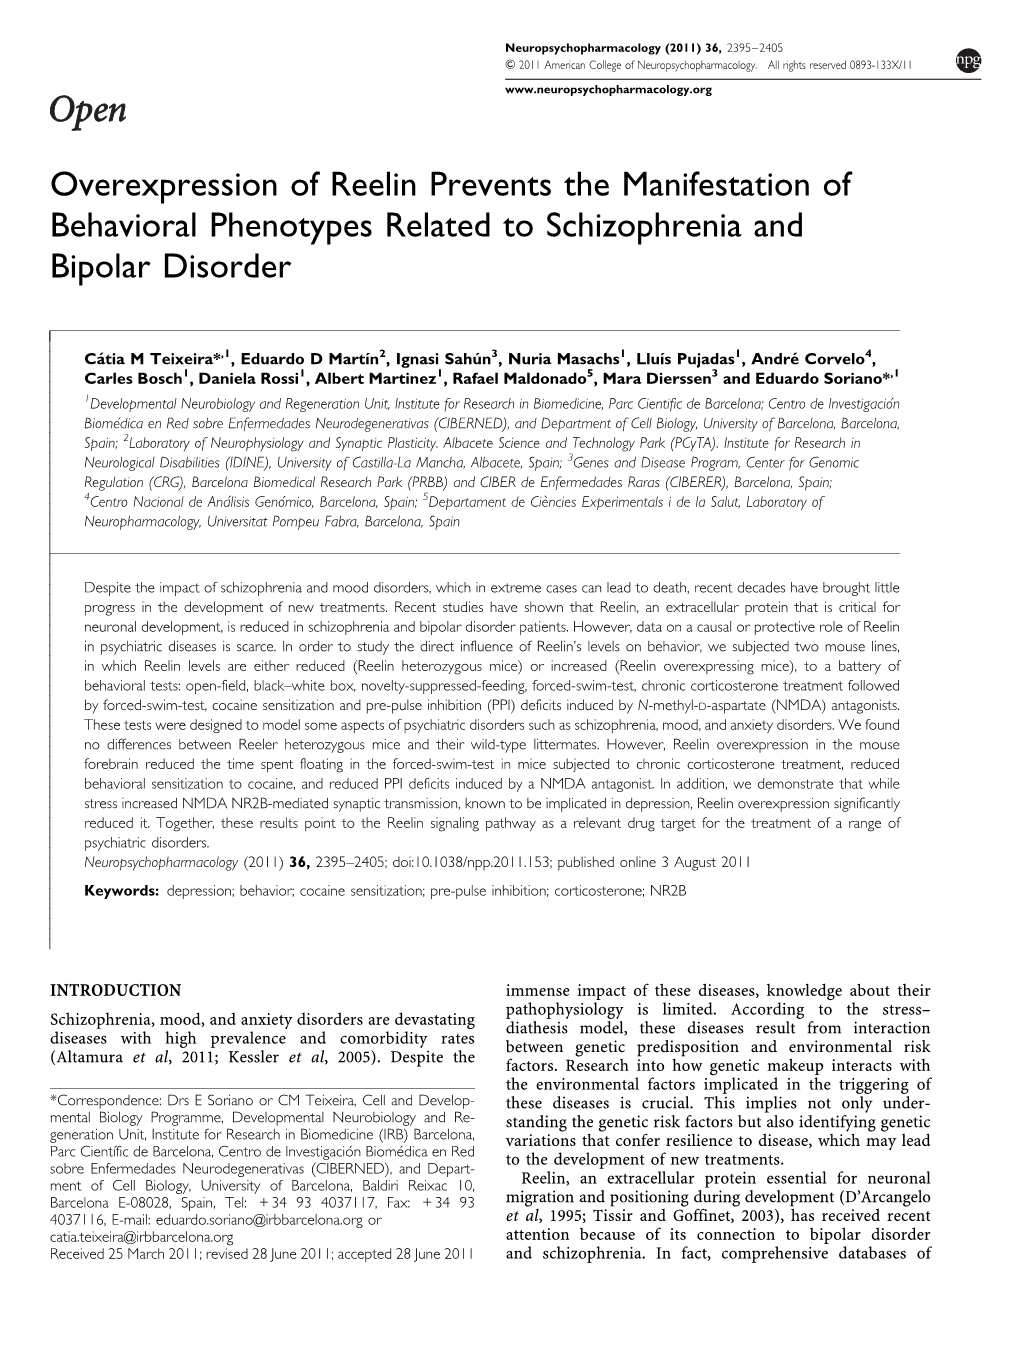 Overexpression of Reelin Prevents the Manifestation of Behavioral Phenotypes Related to Schizophrenia and Bipolar Disorder